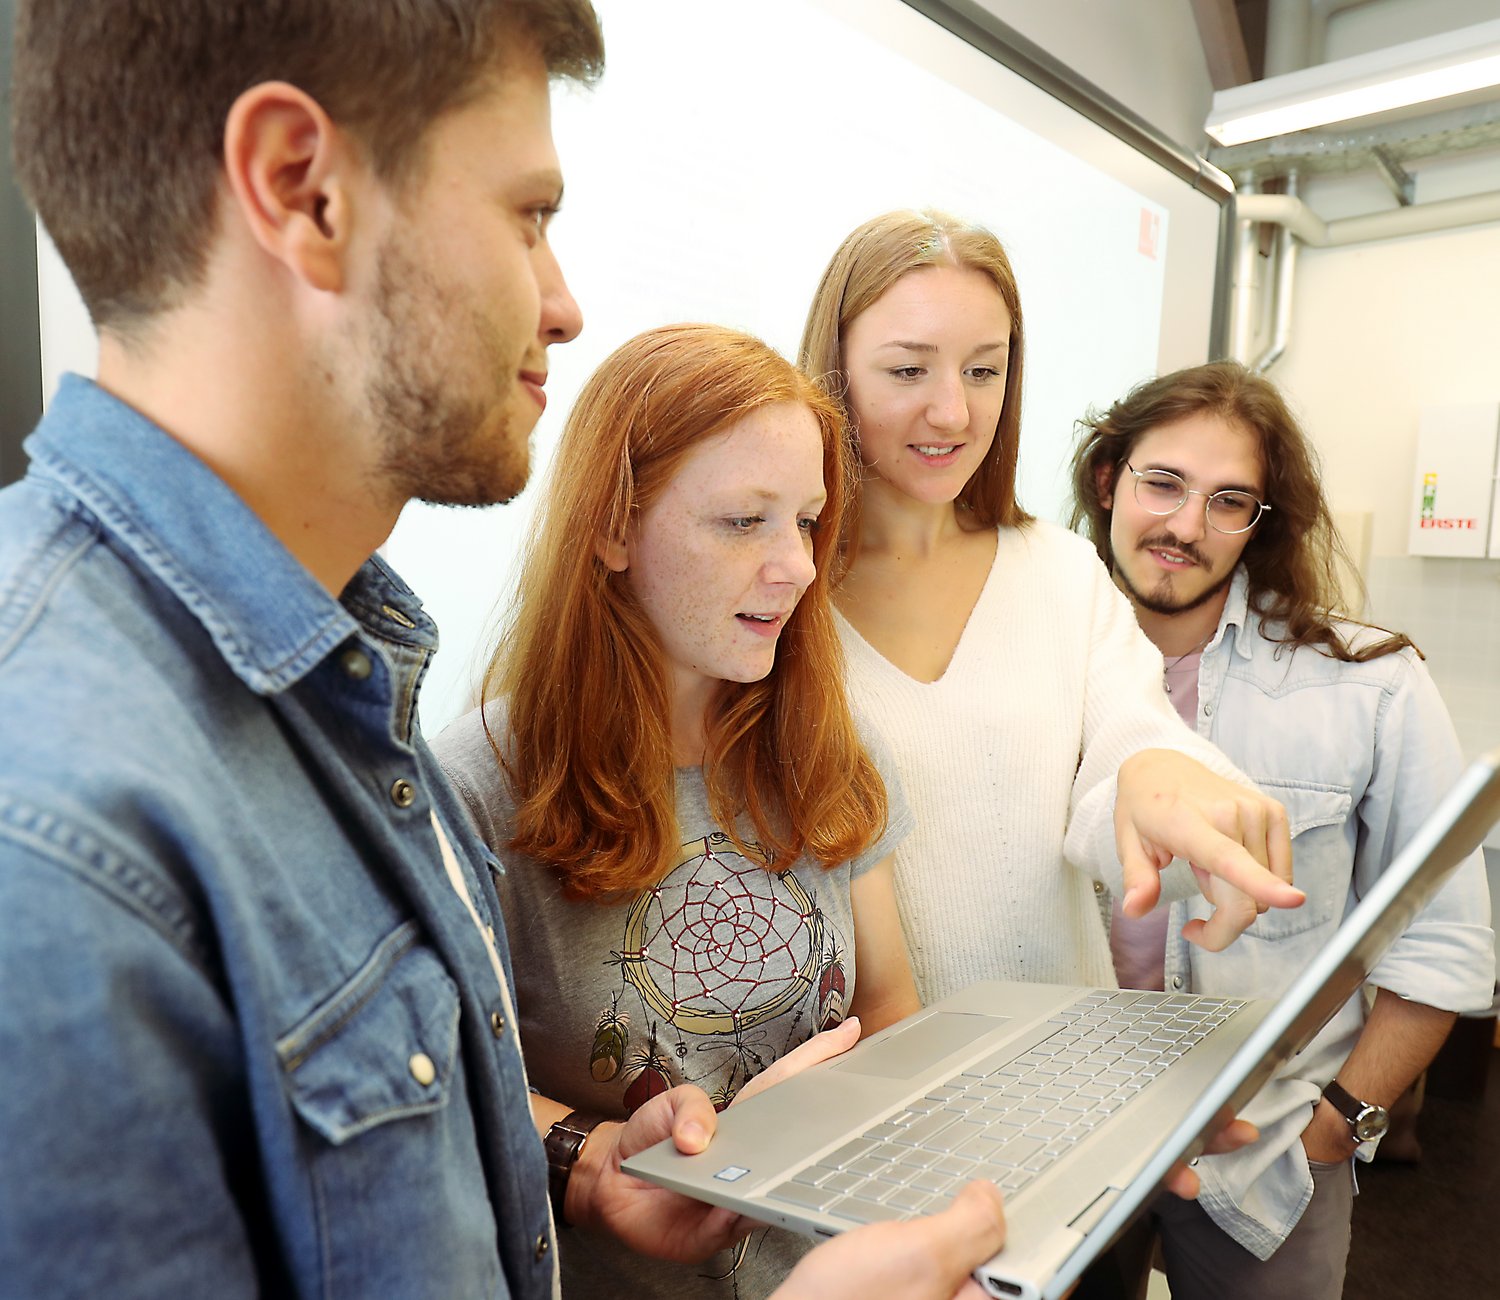 Four students look together at the screen of a laptop. 